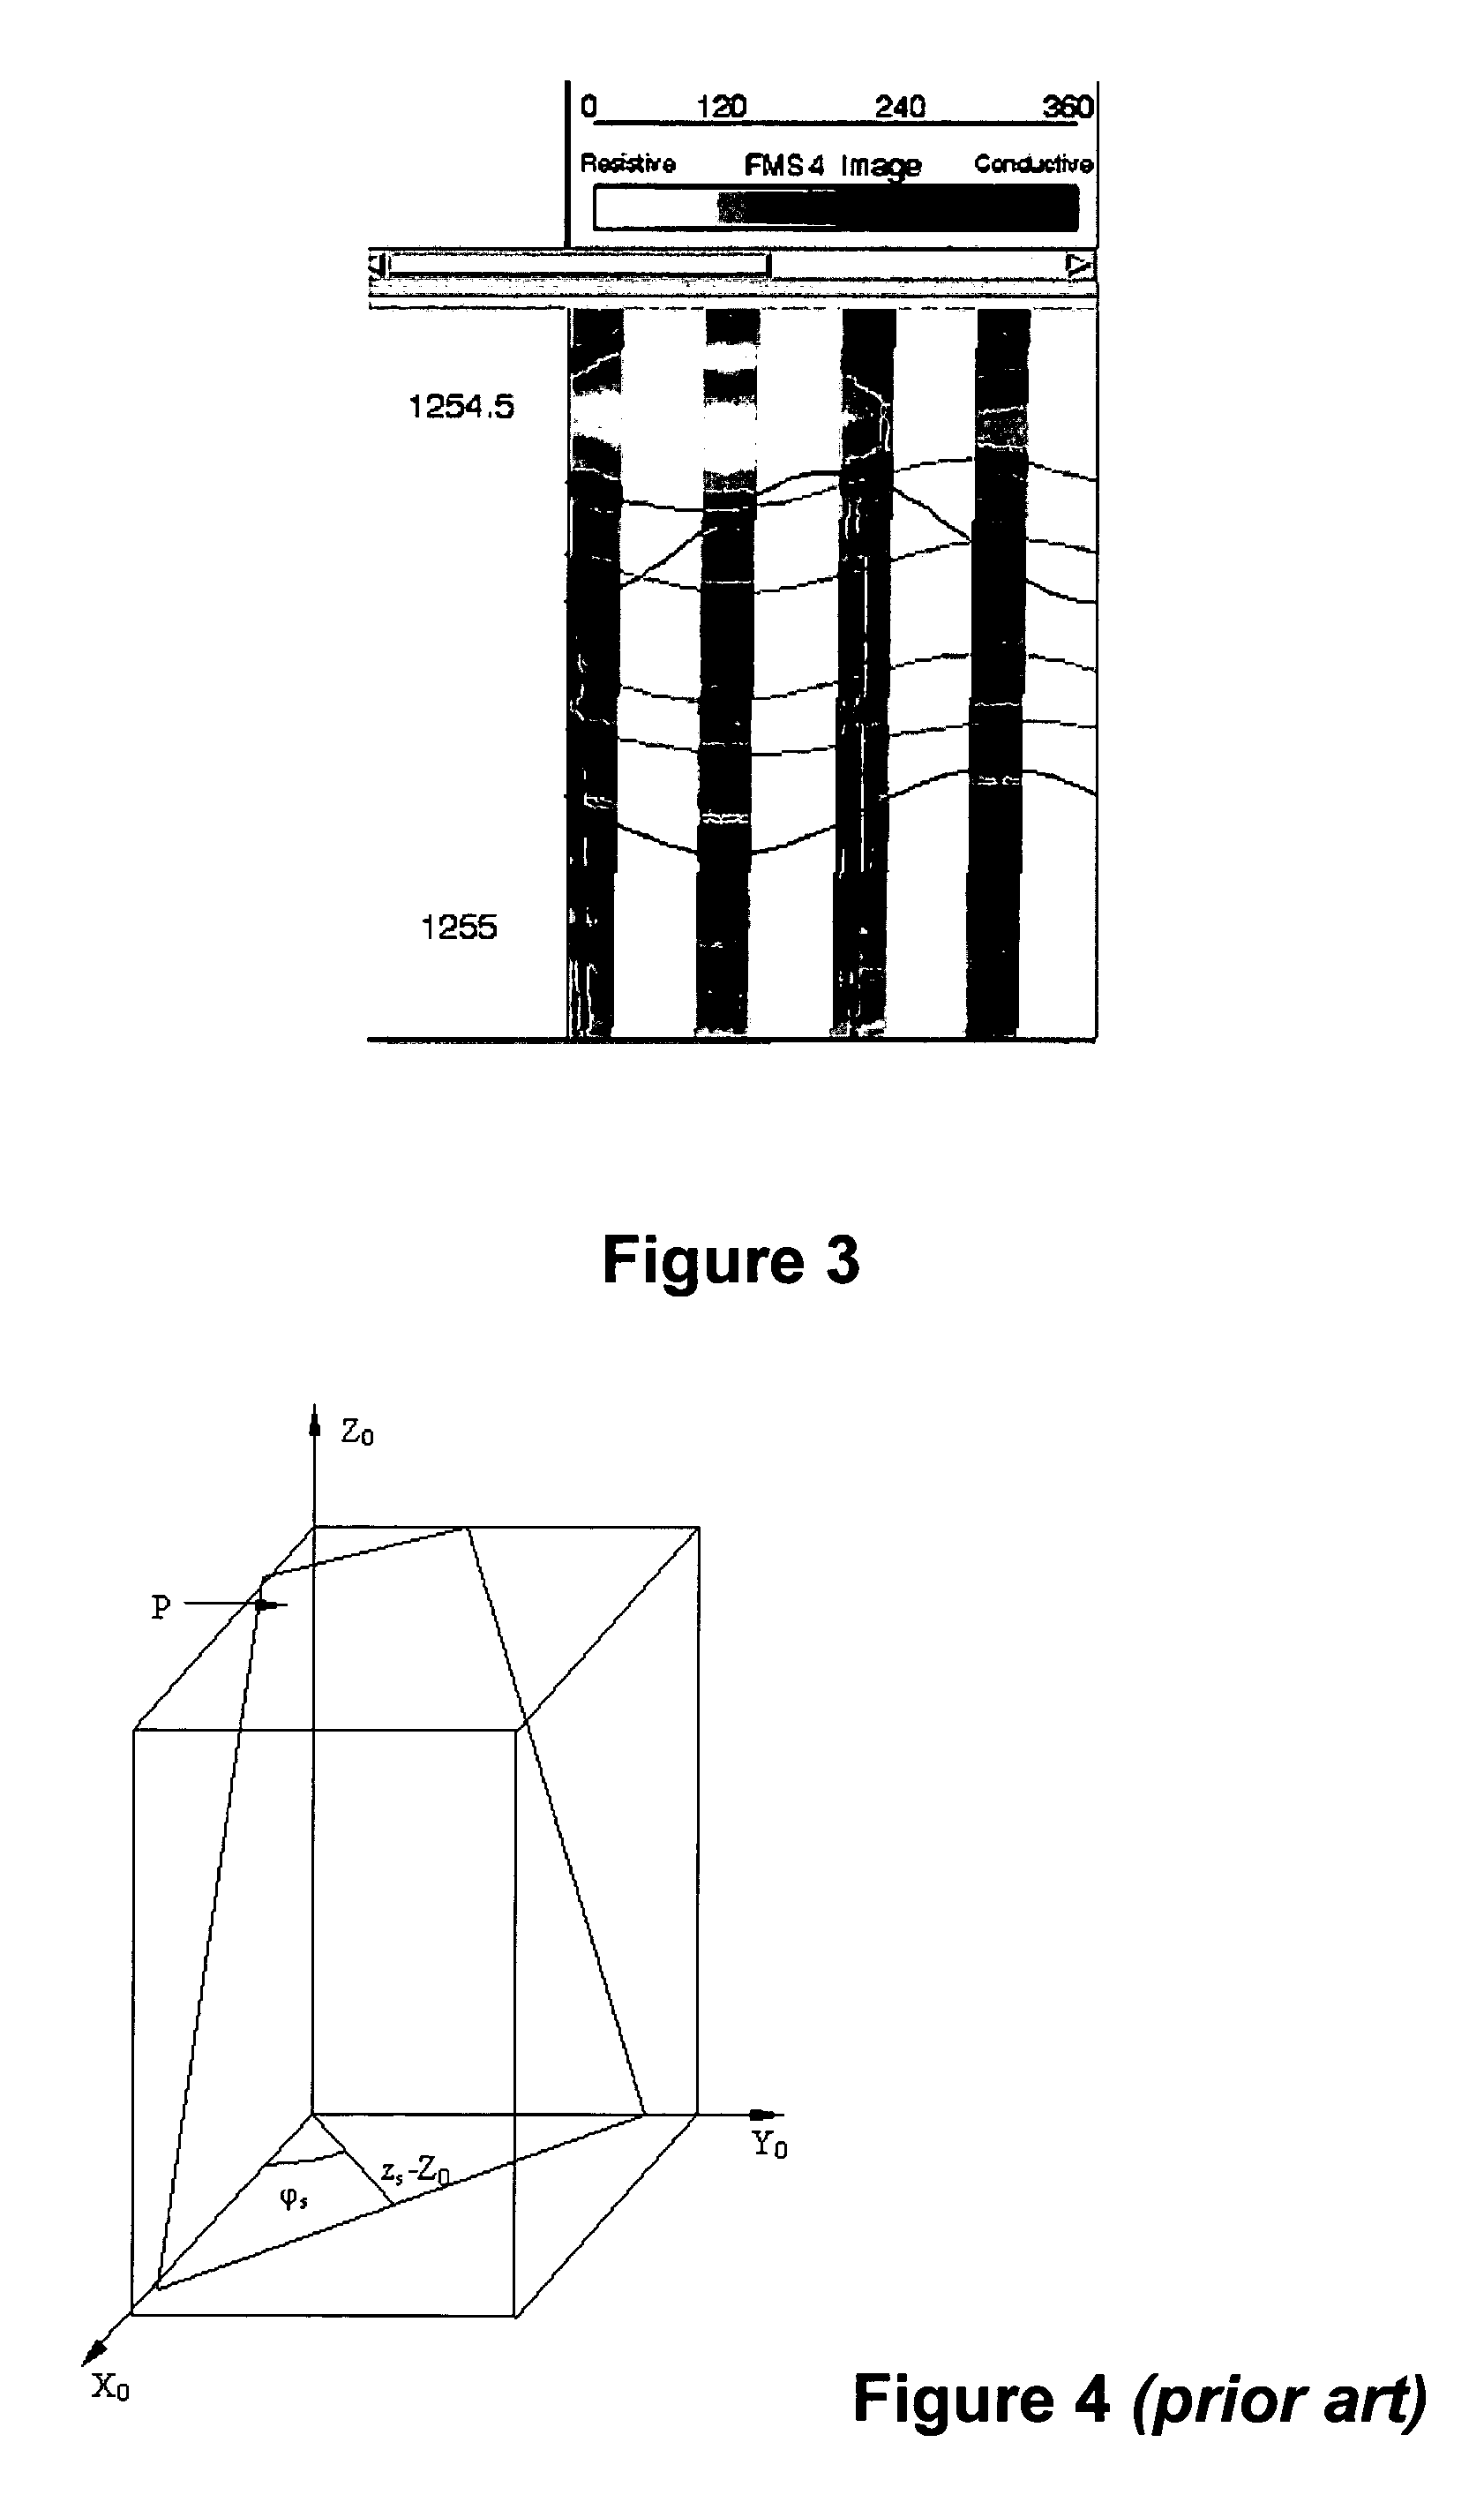 Method of determining planar events from borehole or core images